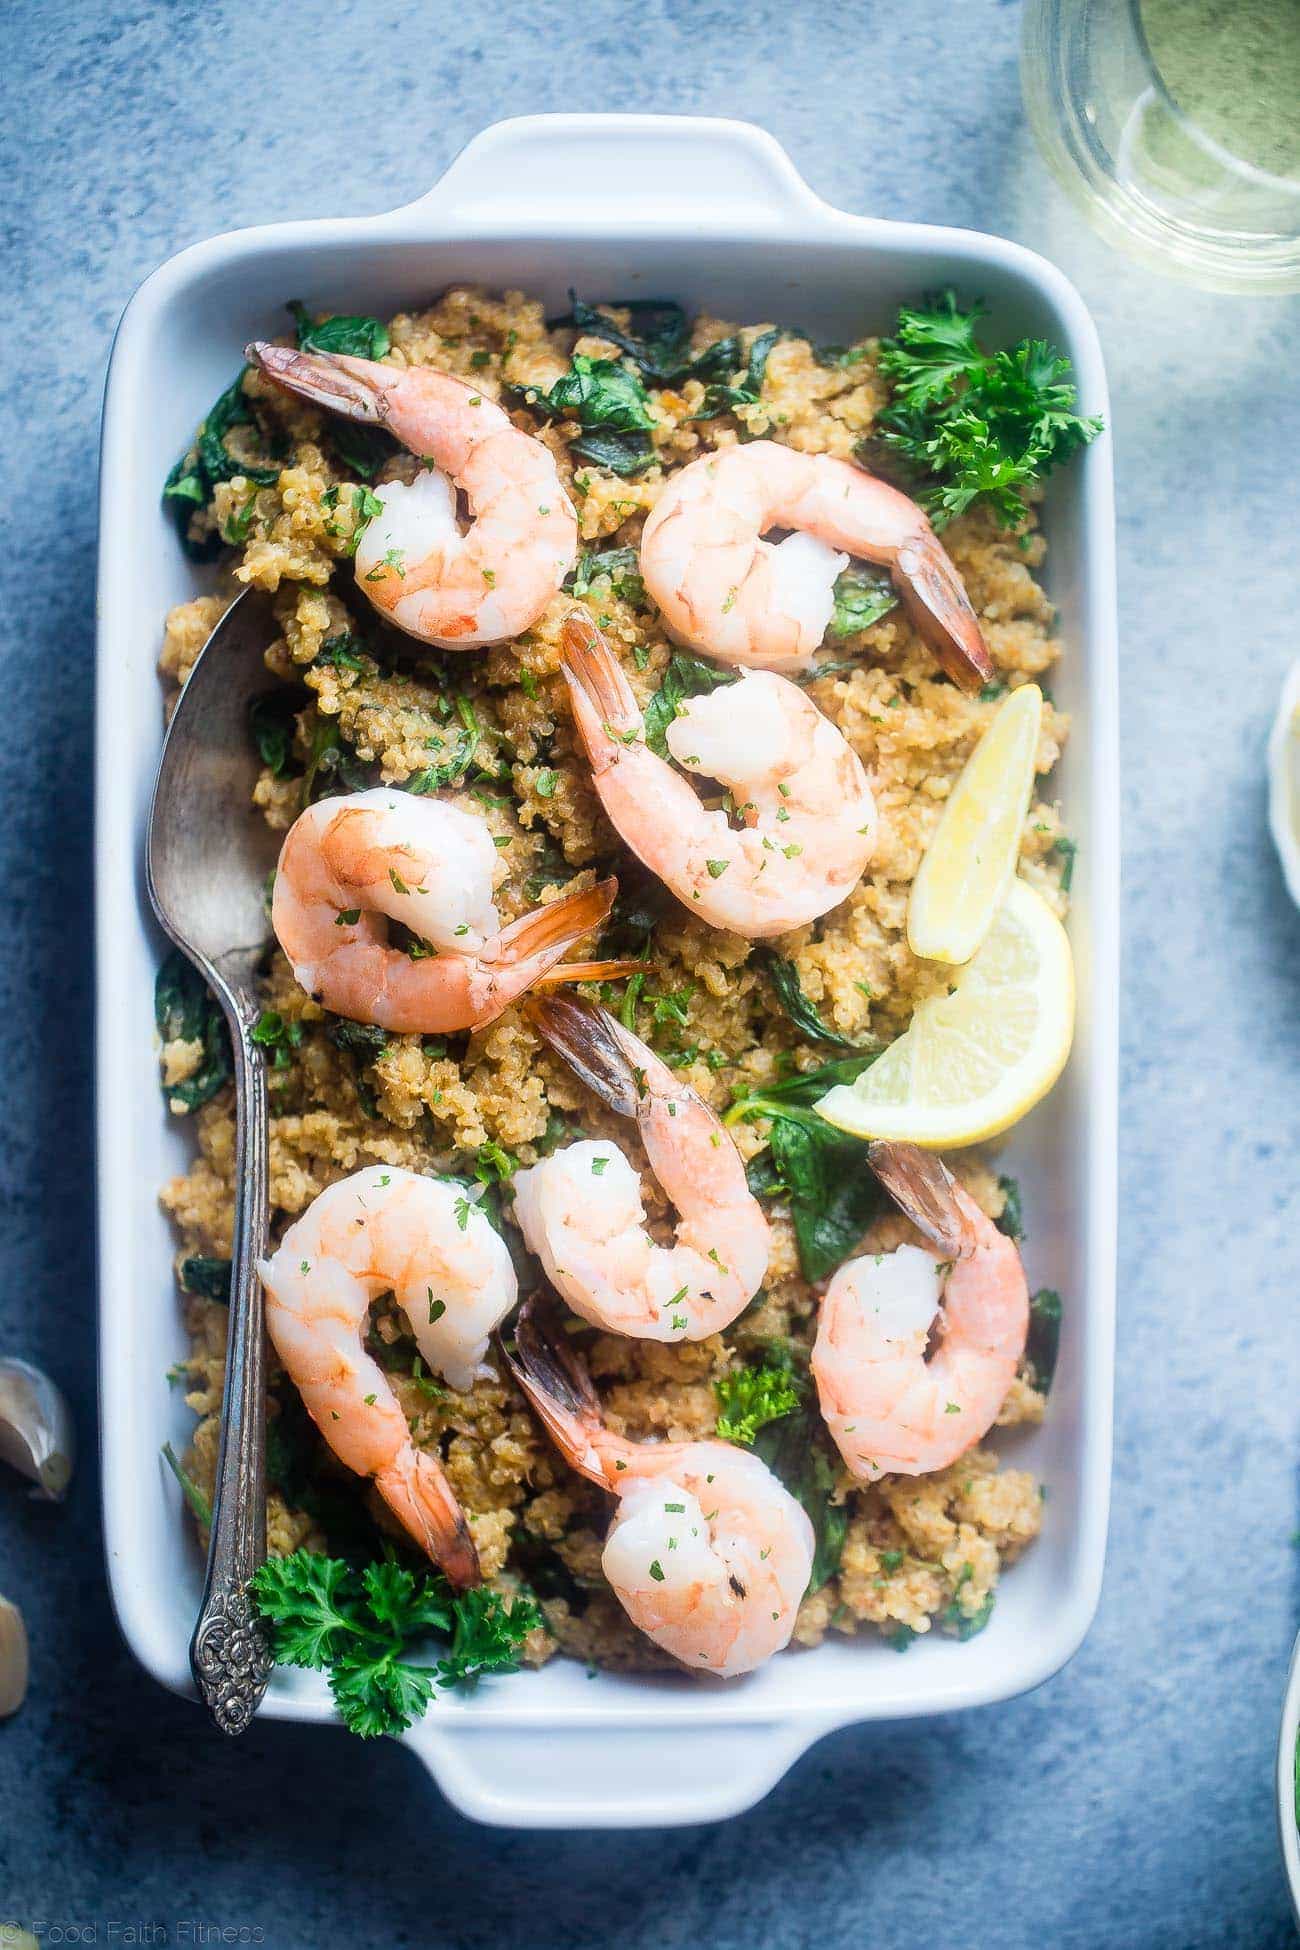 Slow Cooker Garlic Butter Shrimp and Quinoa - This easy, 7 ingredient weeknight dinner is made in the slow cooker! It's a healthy, gluten free meal that the whole family will love! | Foodfaithfitness.com | @FoodFaithFit